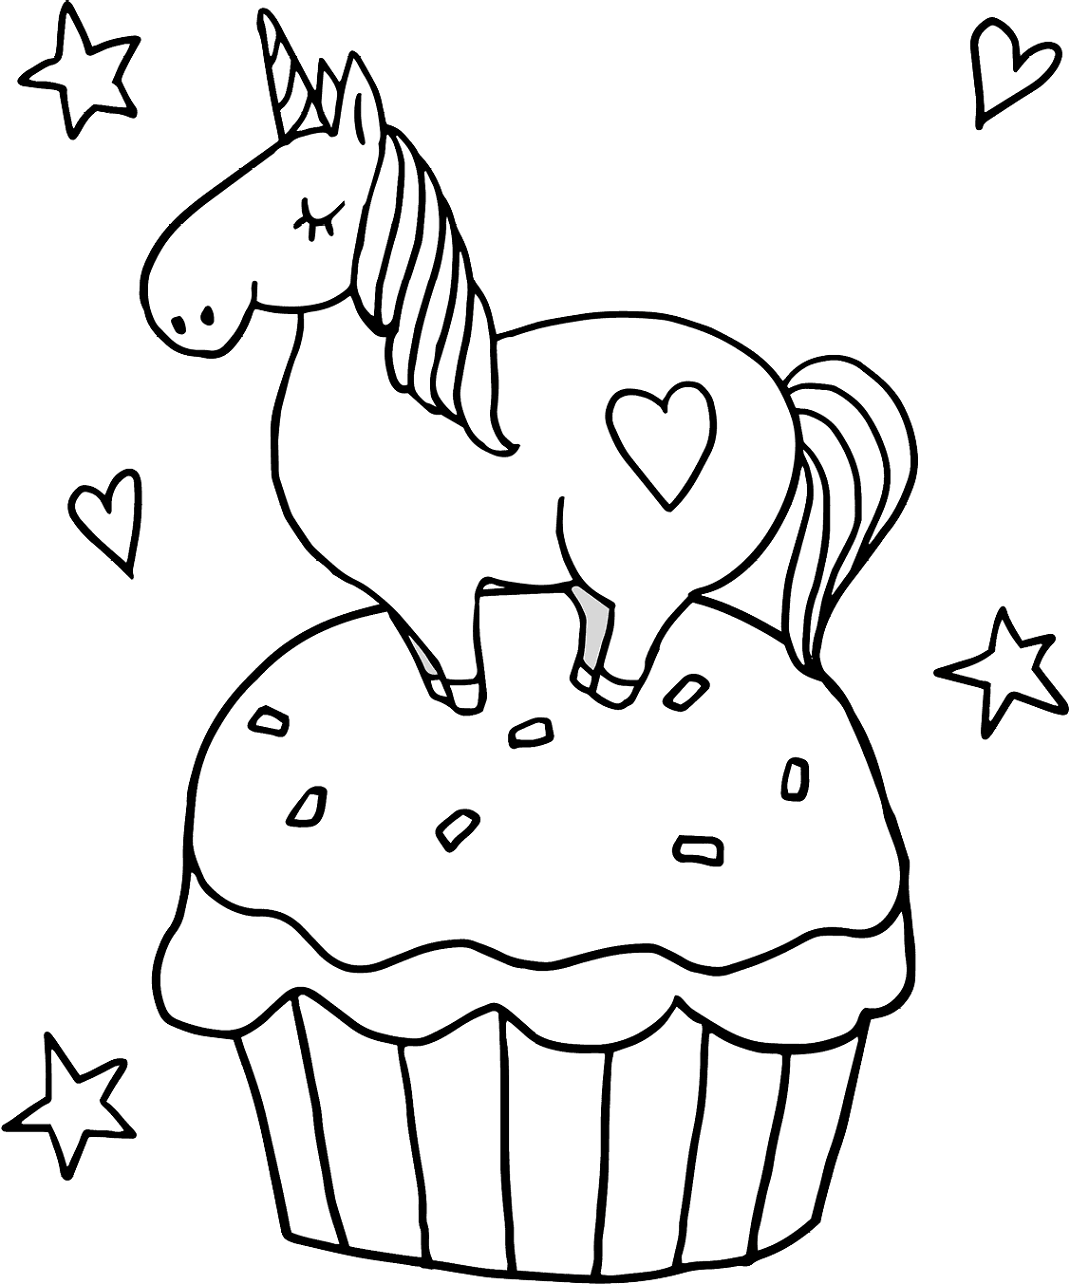 Little Unicorn On Cupcake Coloring Page